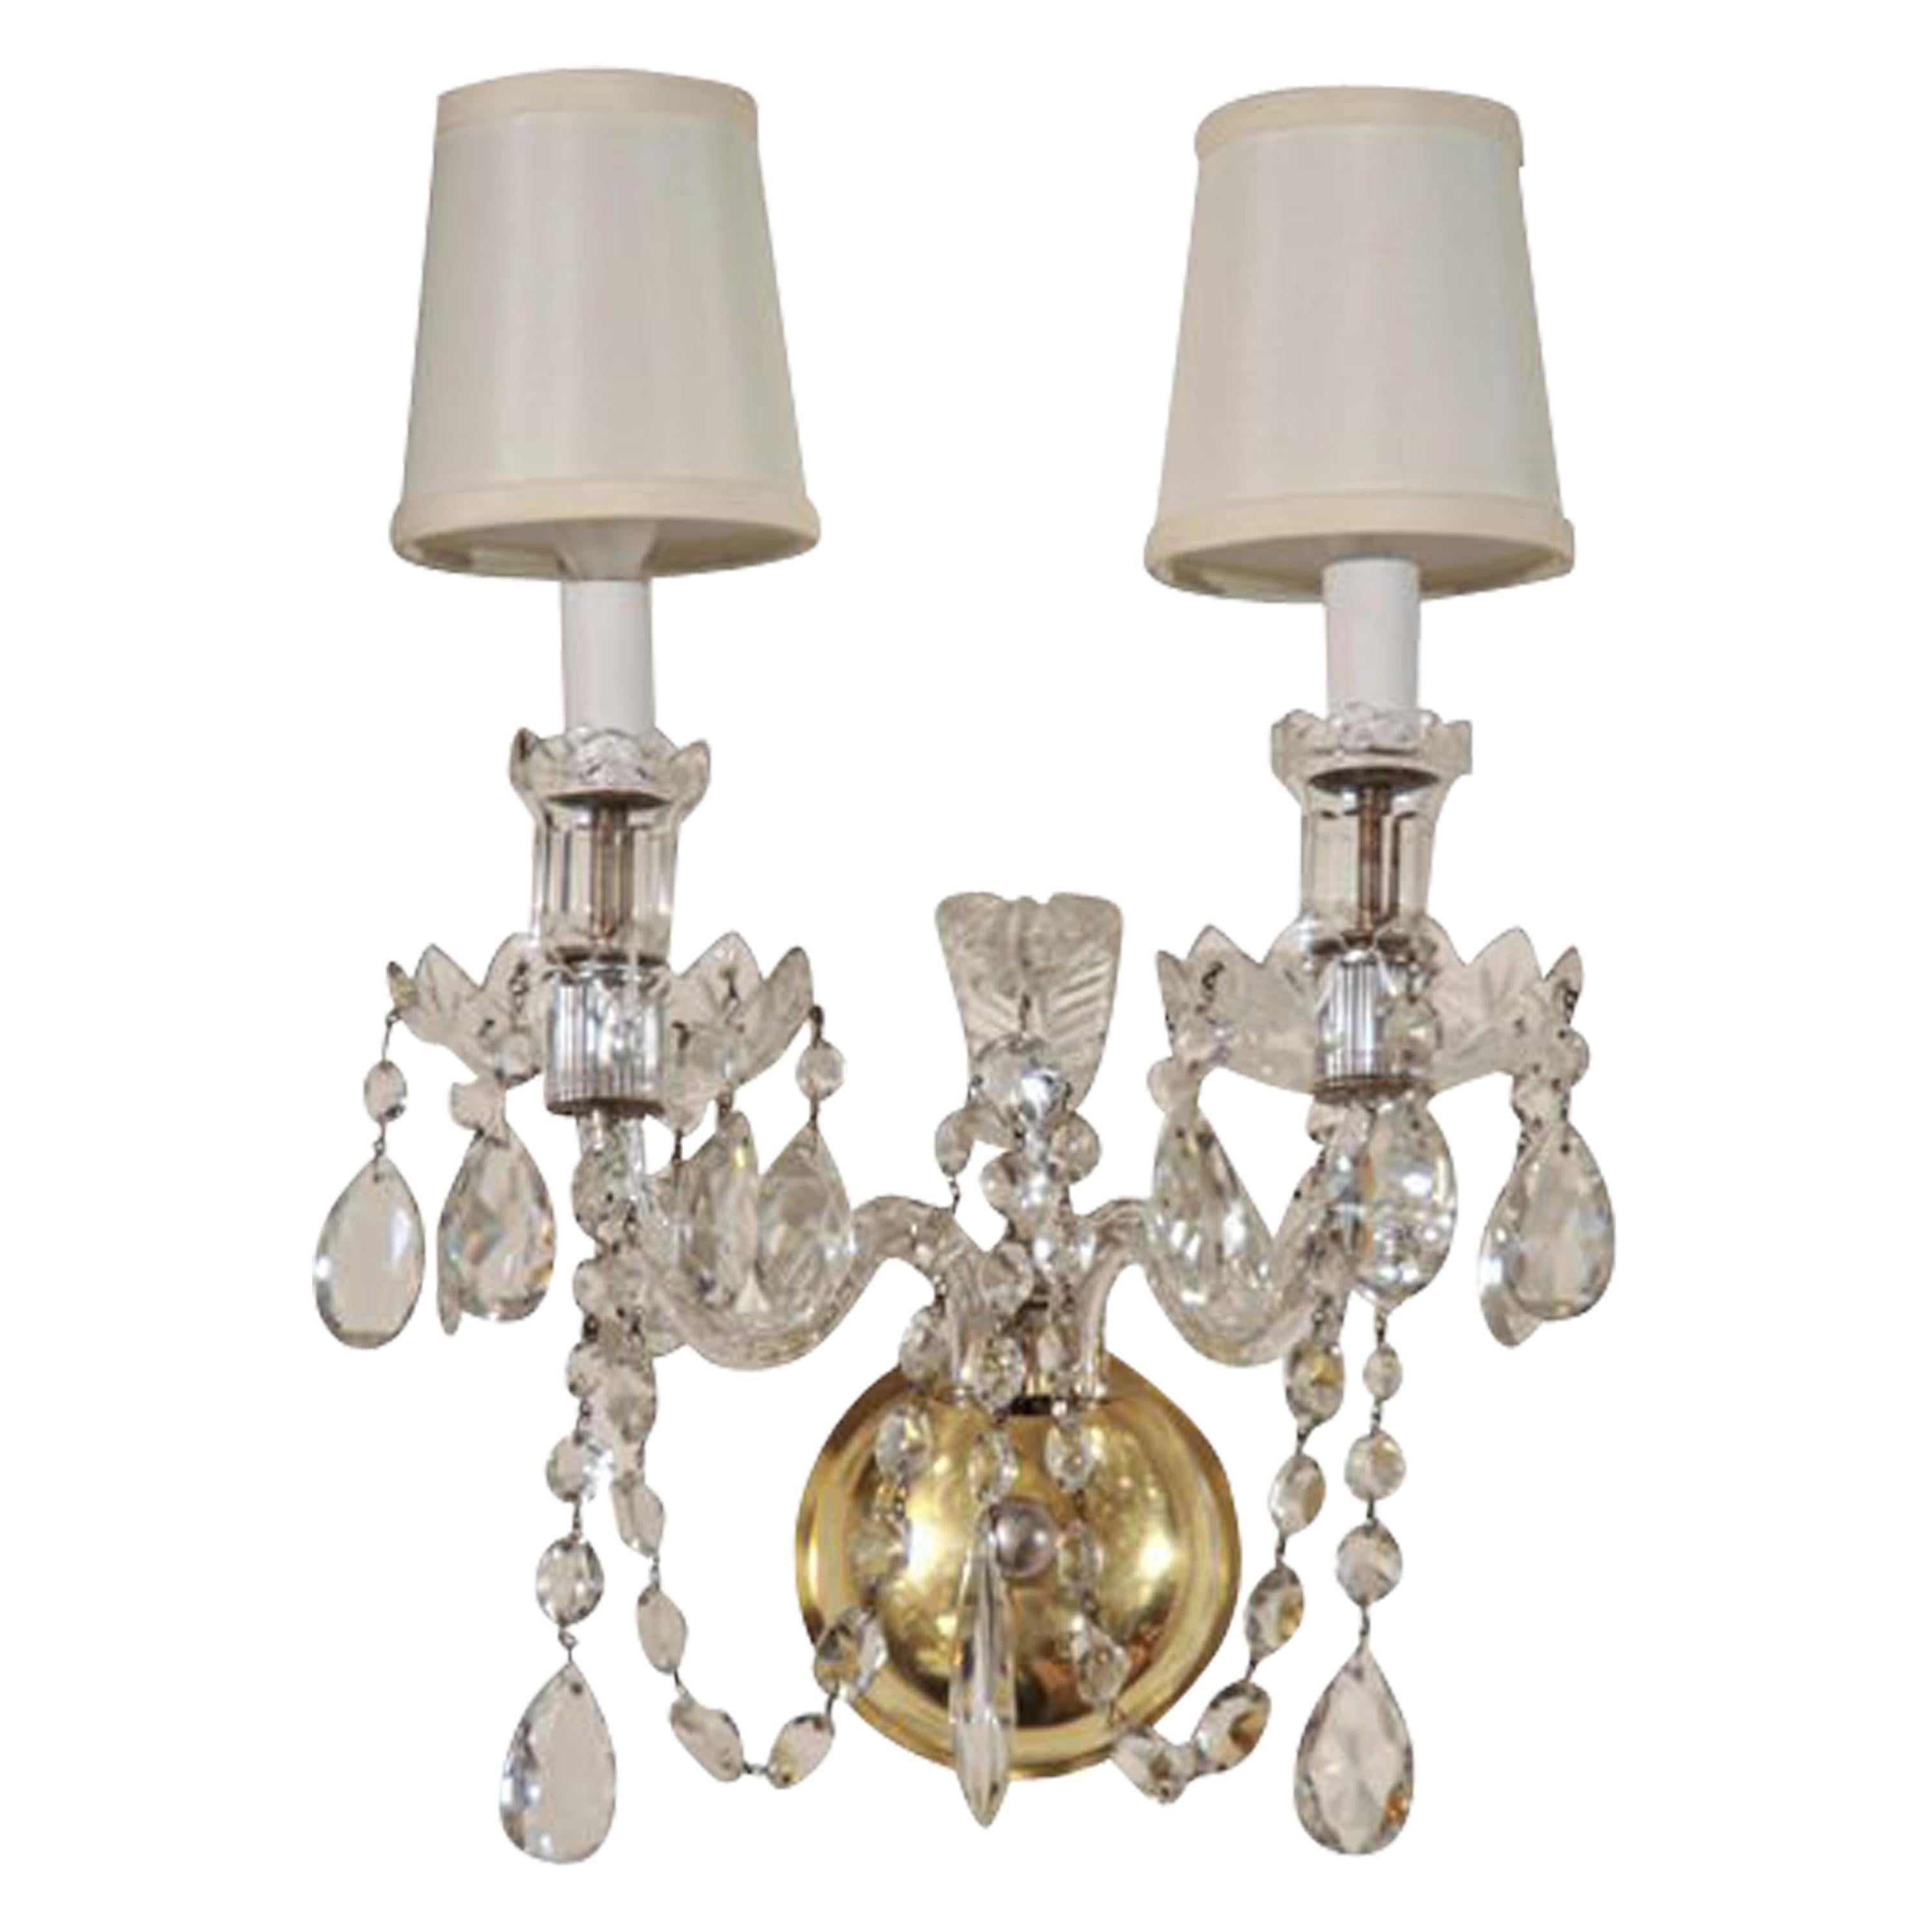 Stunning 1940's Hollywood Cut Crystal Sconce with Crystal Plume Detail